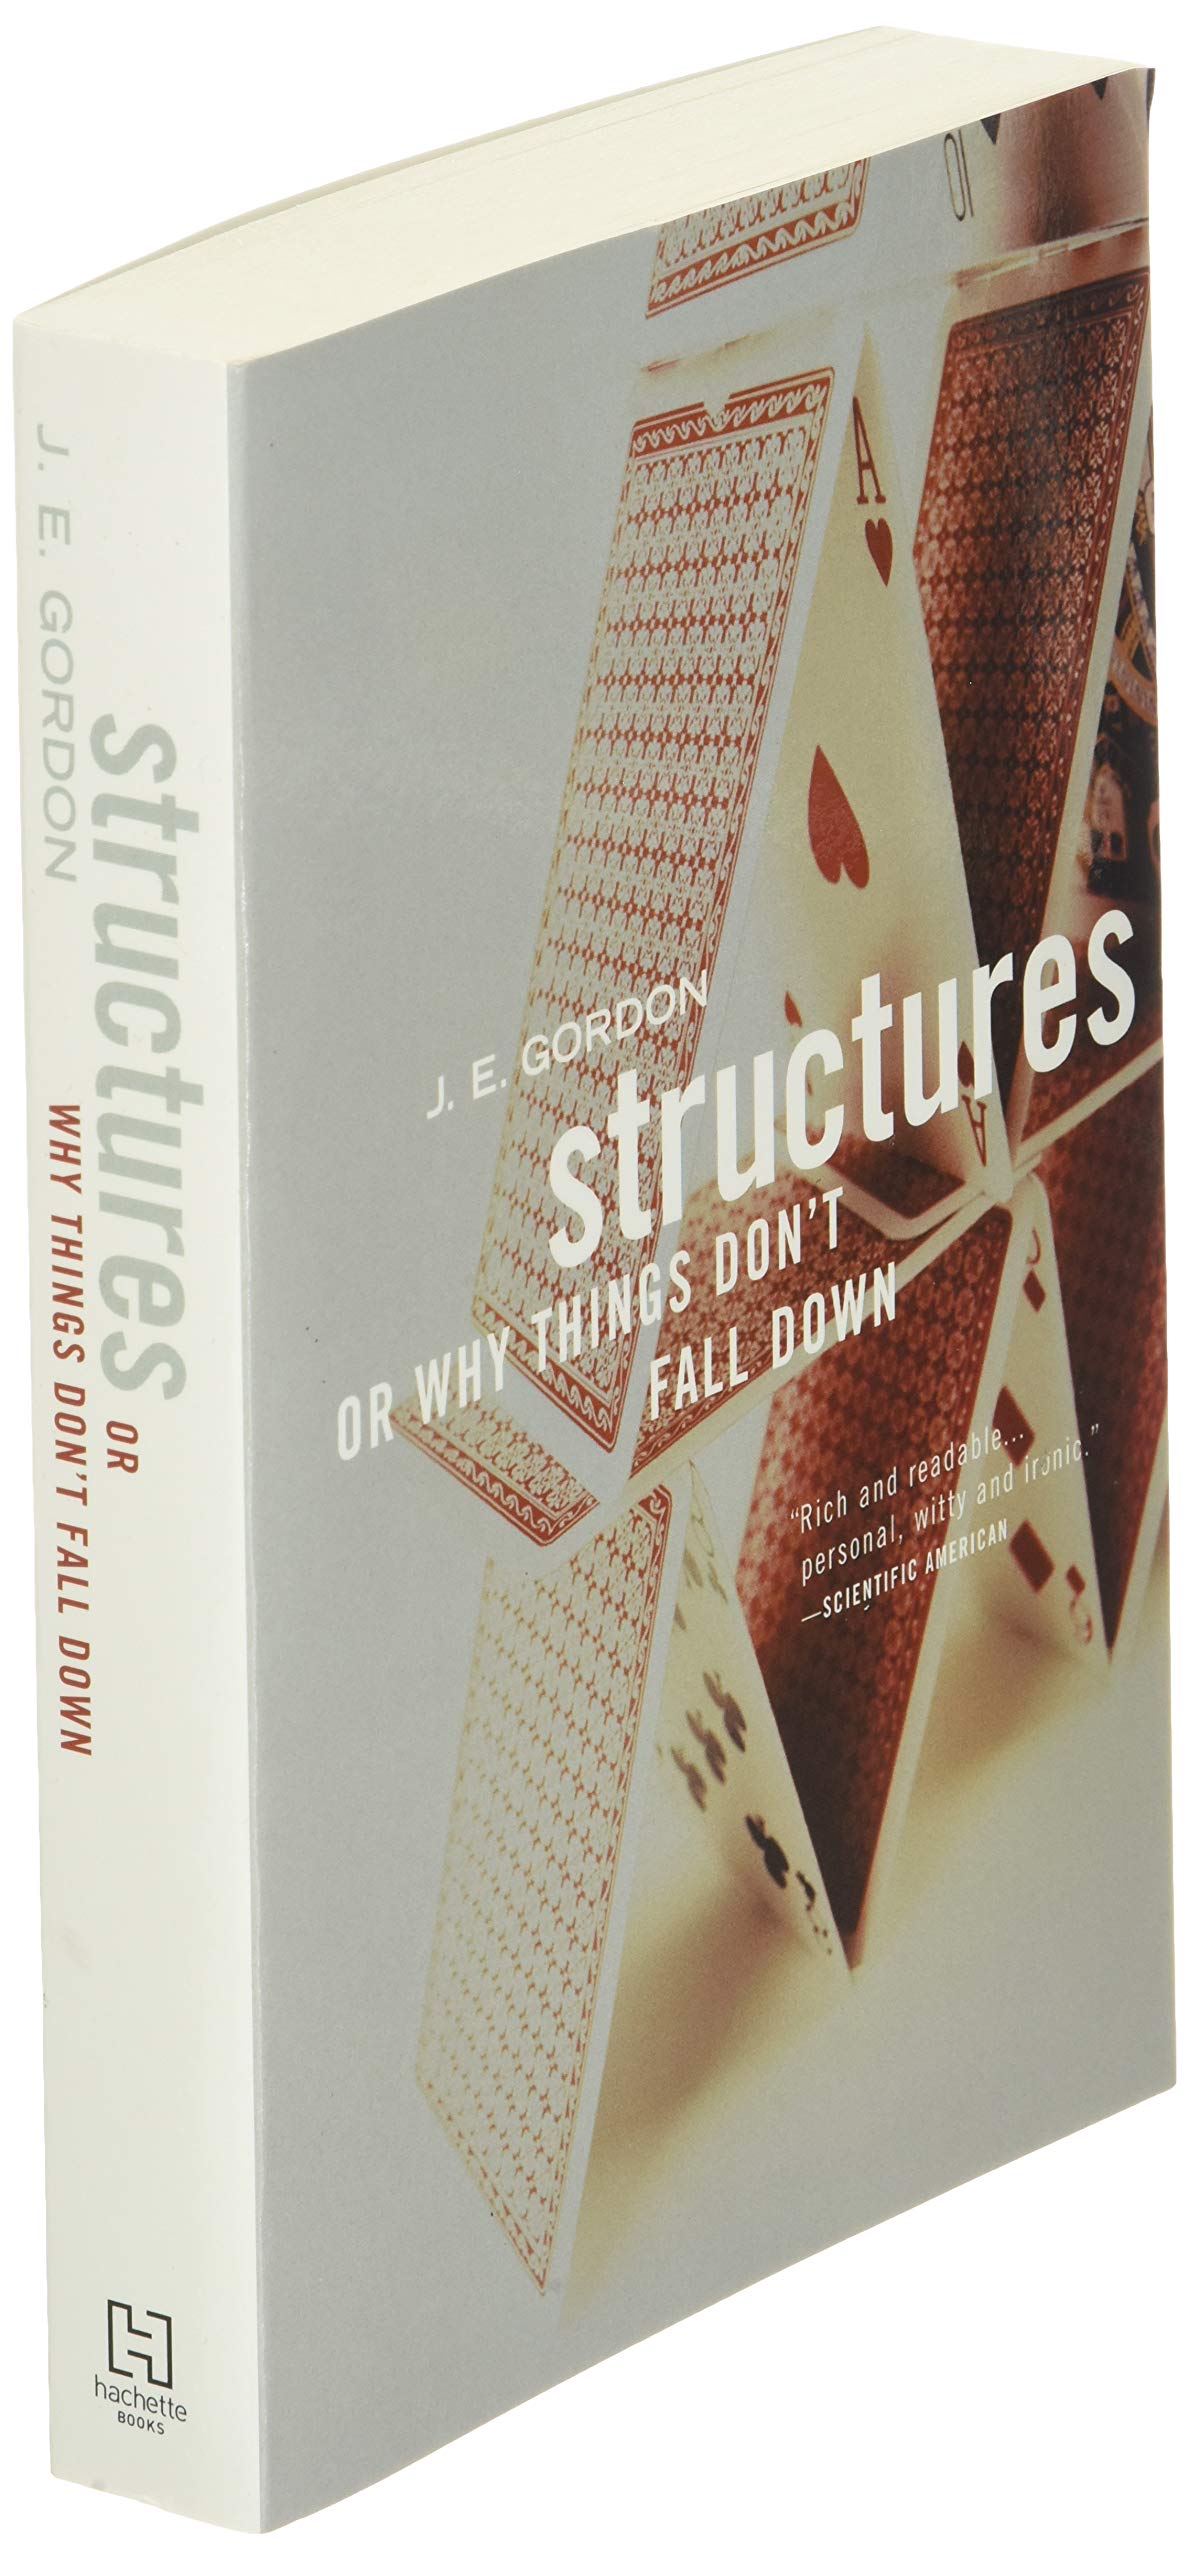 Structures: Or Why Things Don't Fall Down